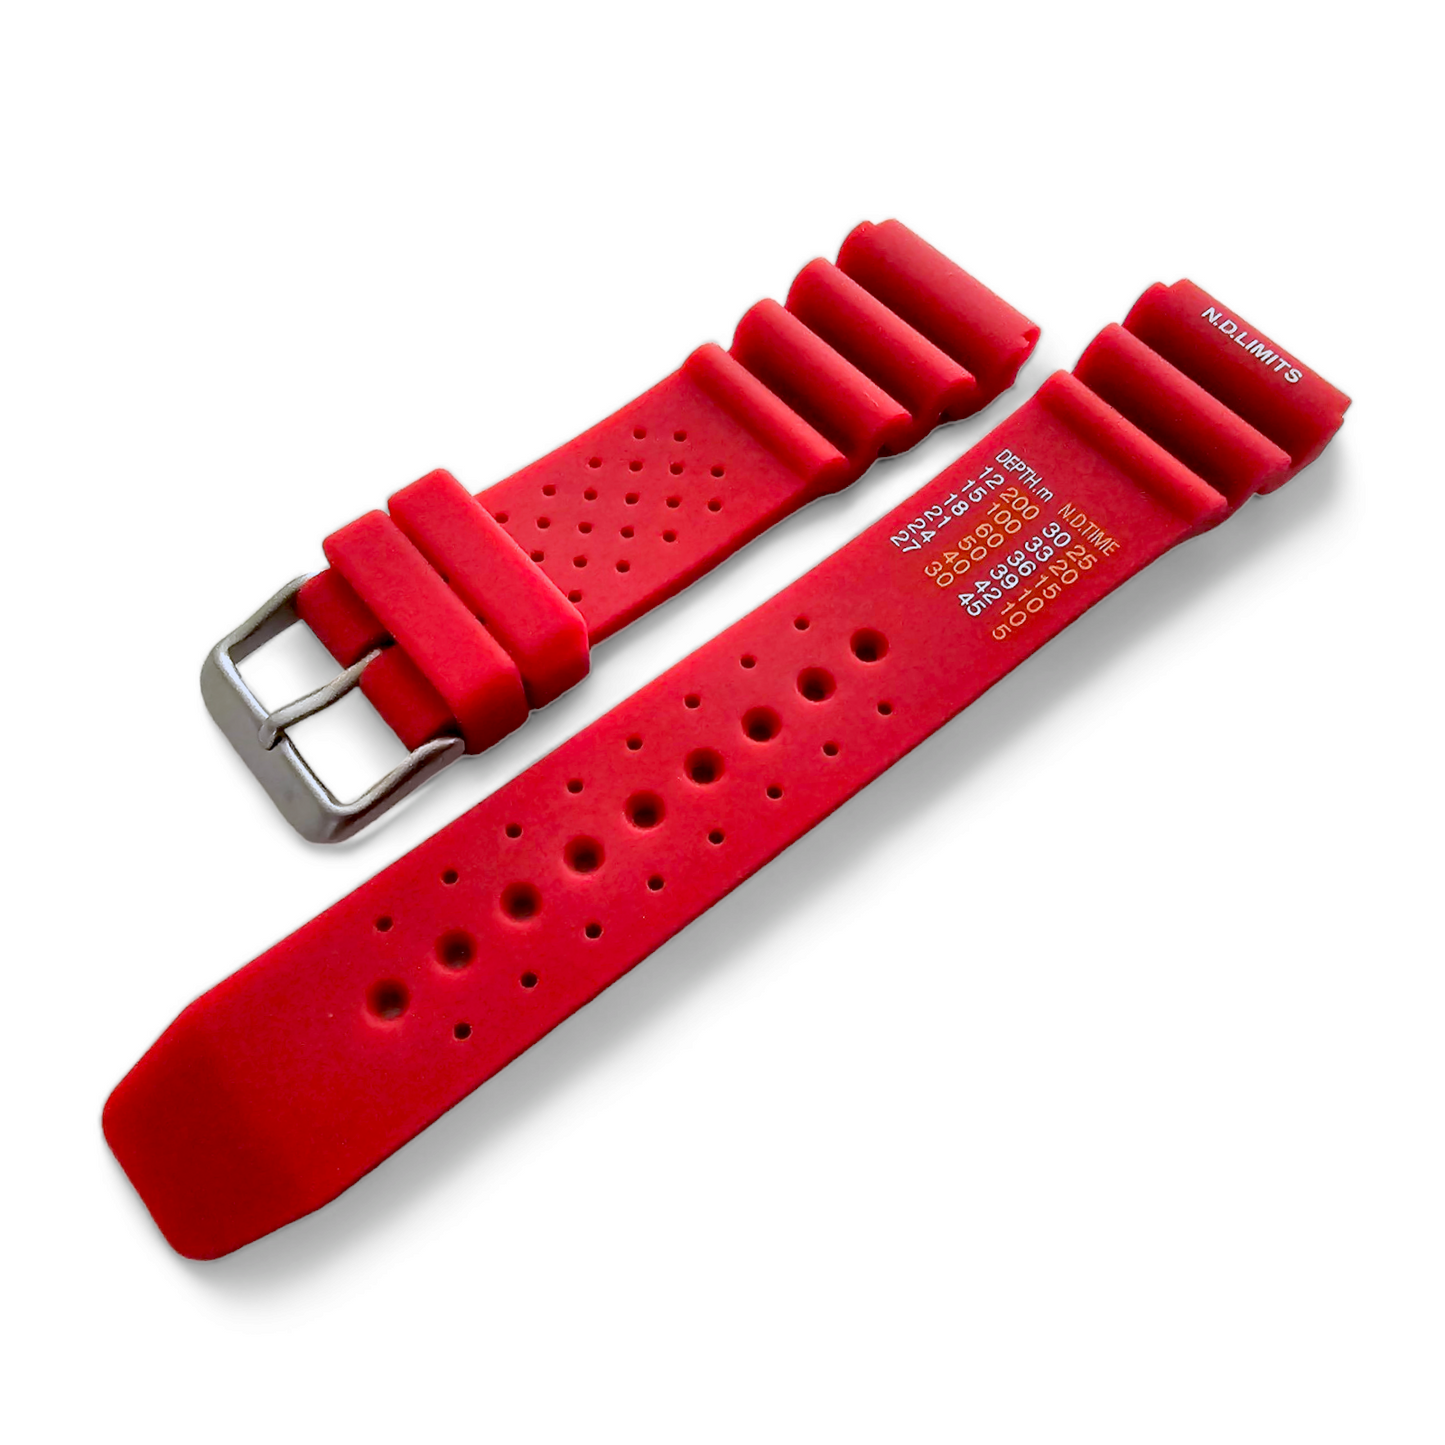 Premium Silicone Rubber ND Limits Divers Watch Strap Band 18mm 20mm 22mm 24mm Red